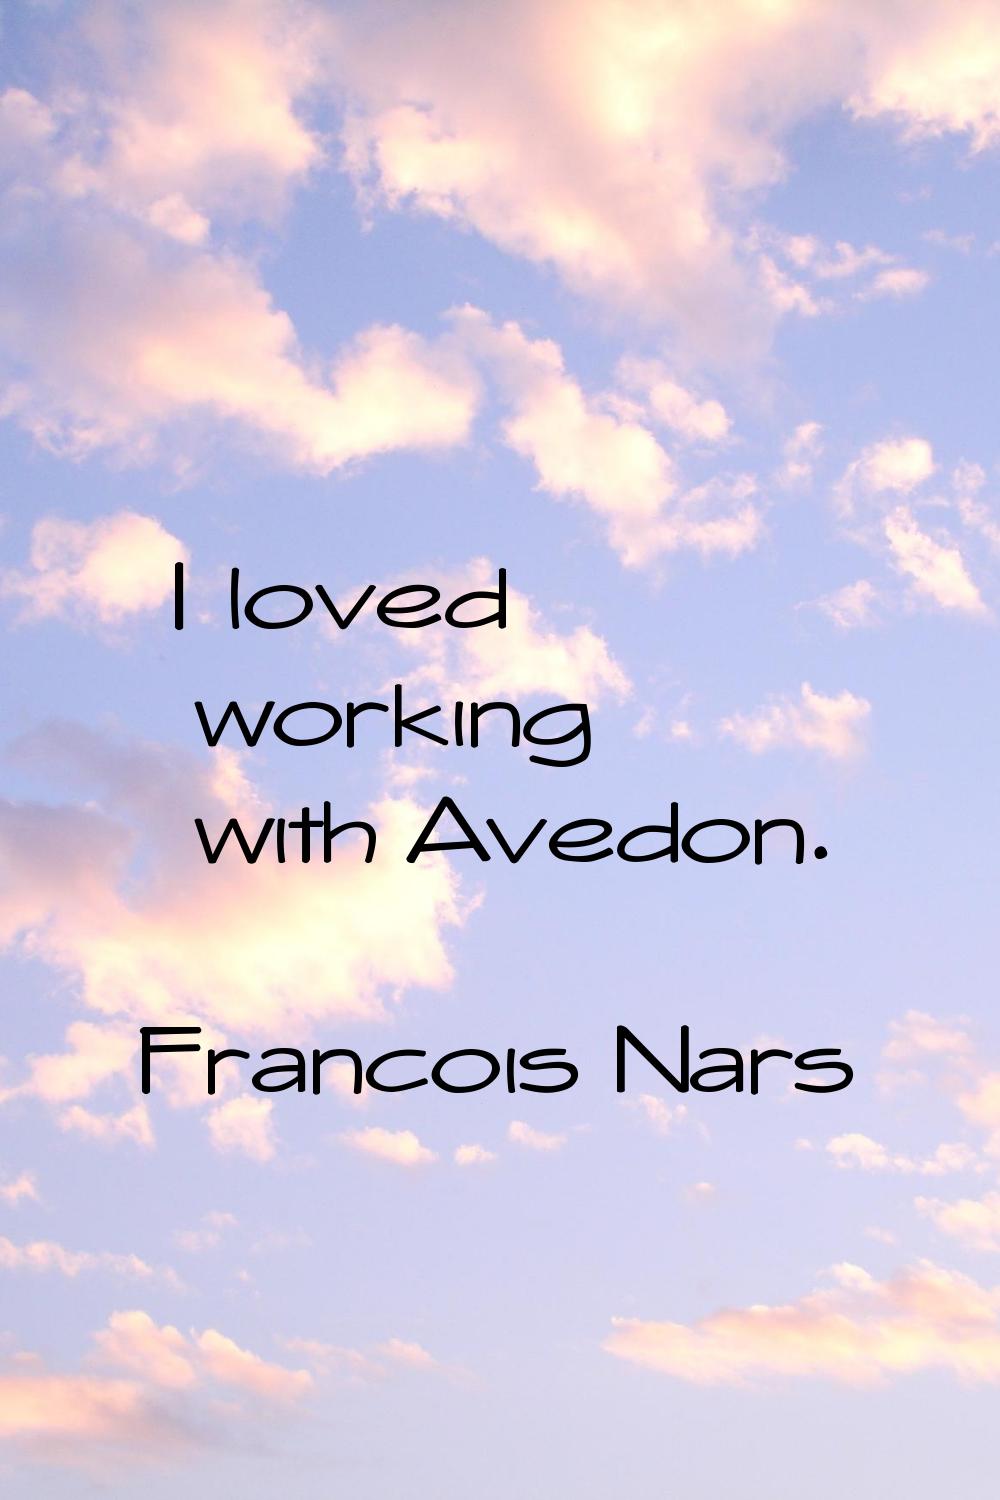 I loved working with Avedon.